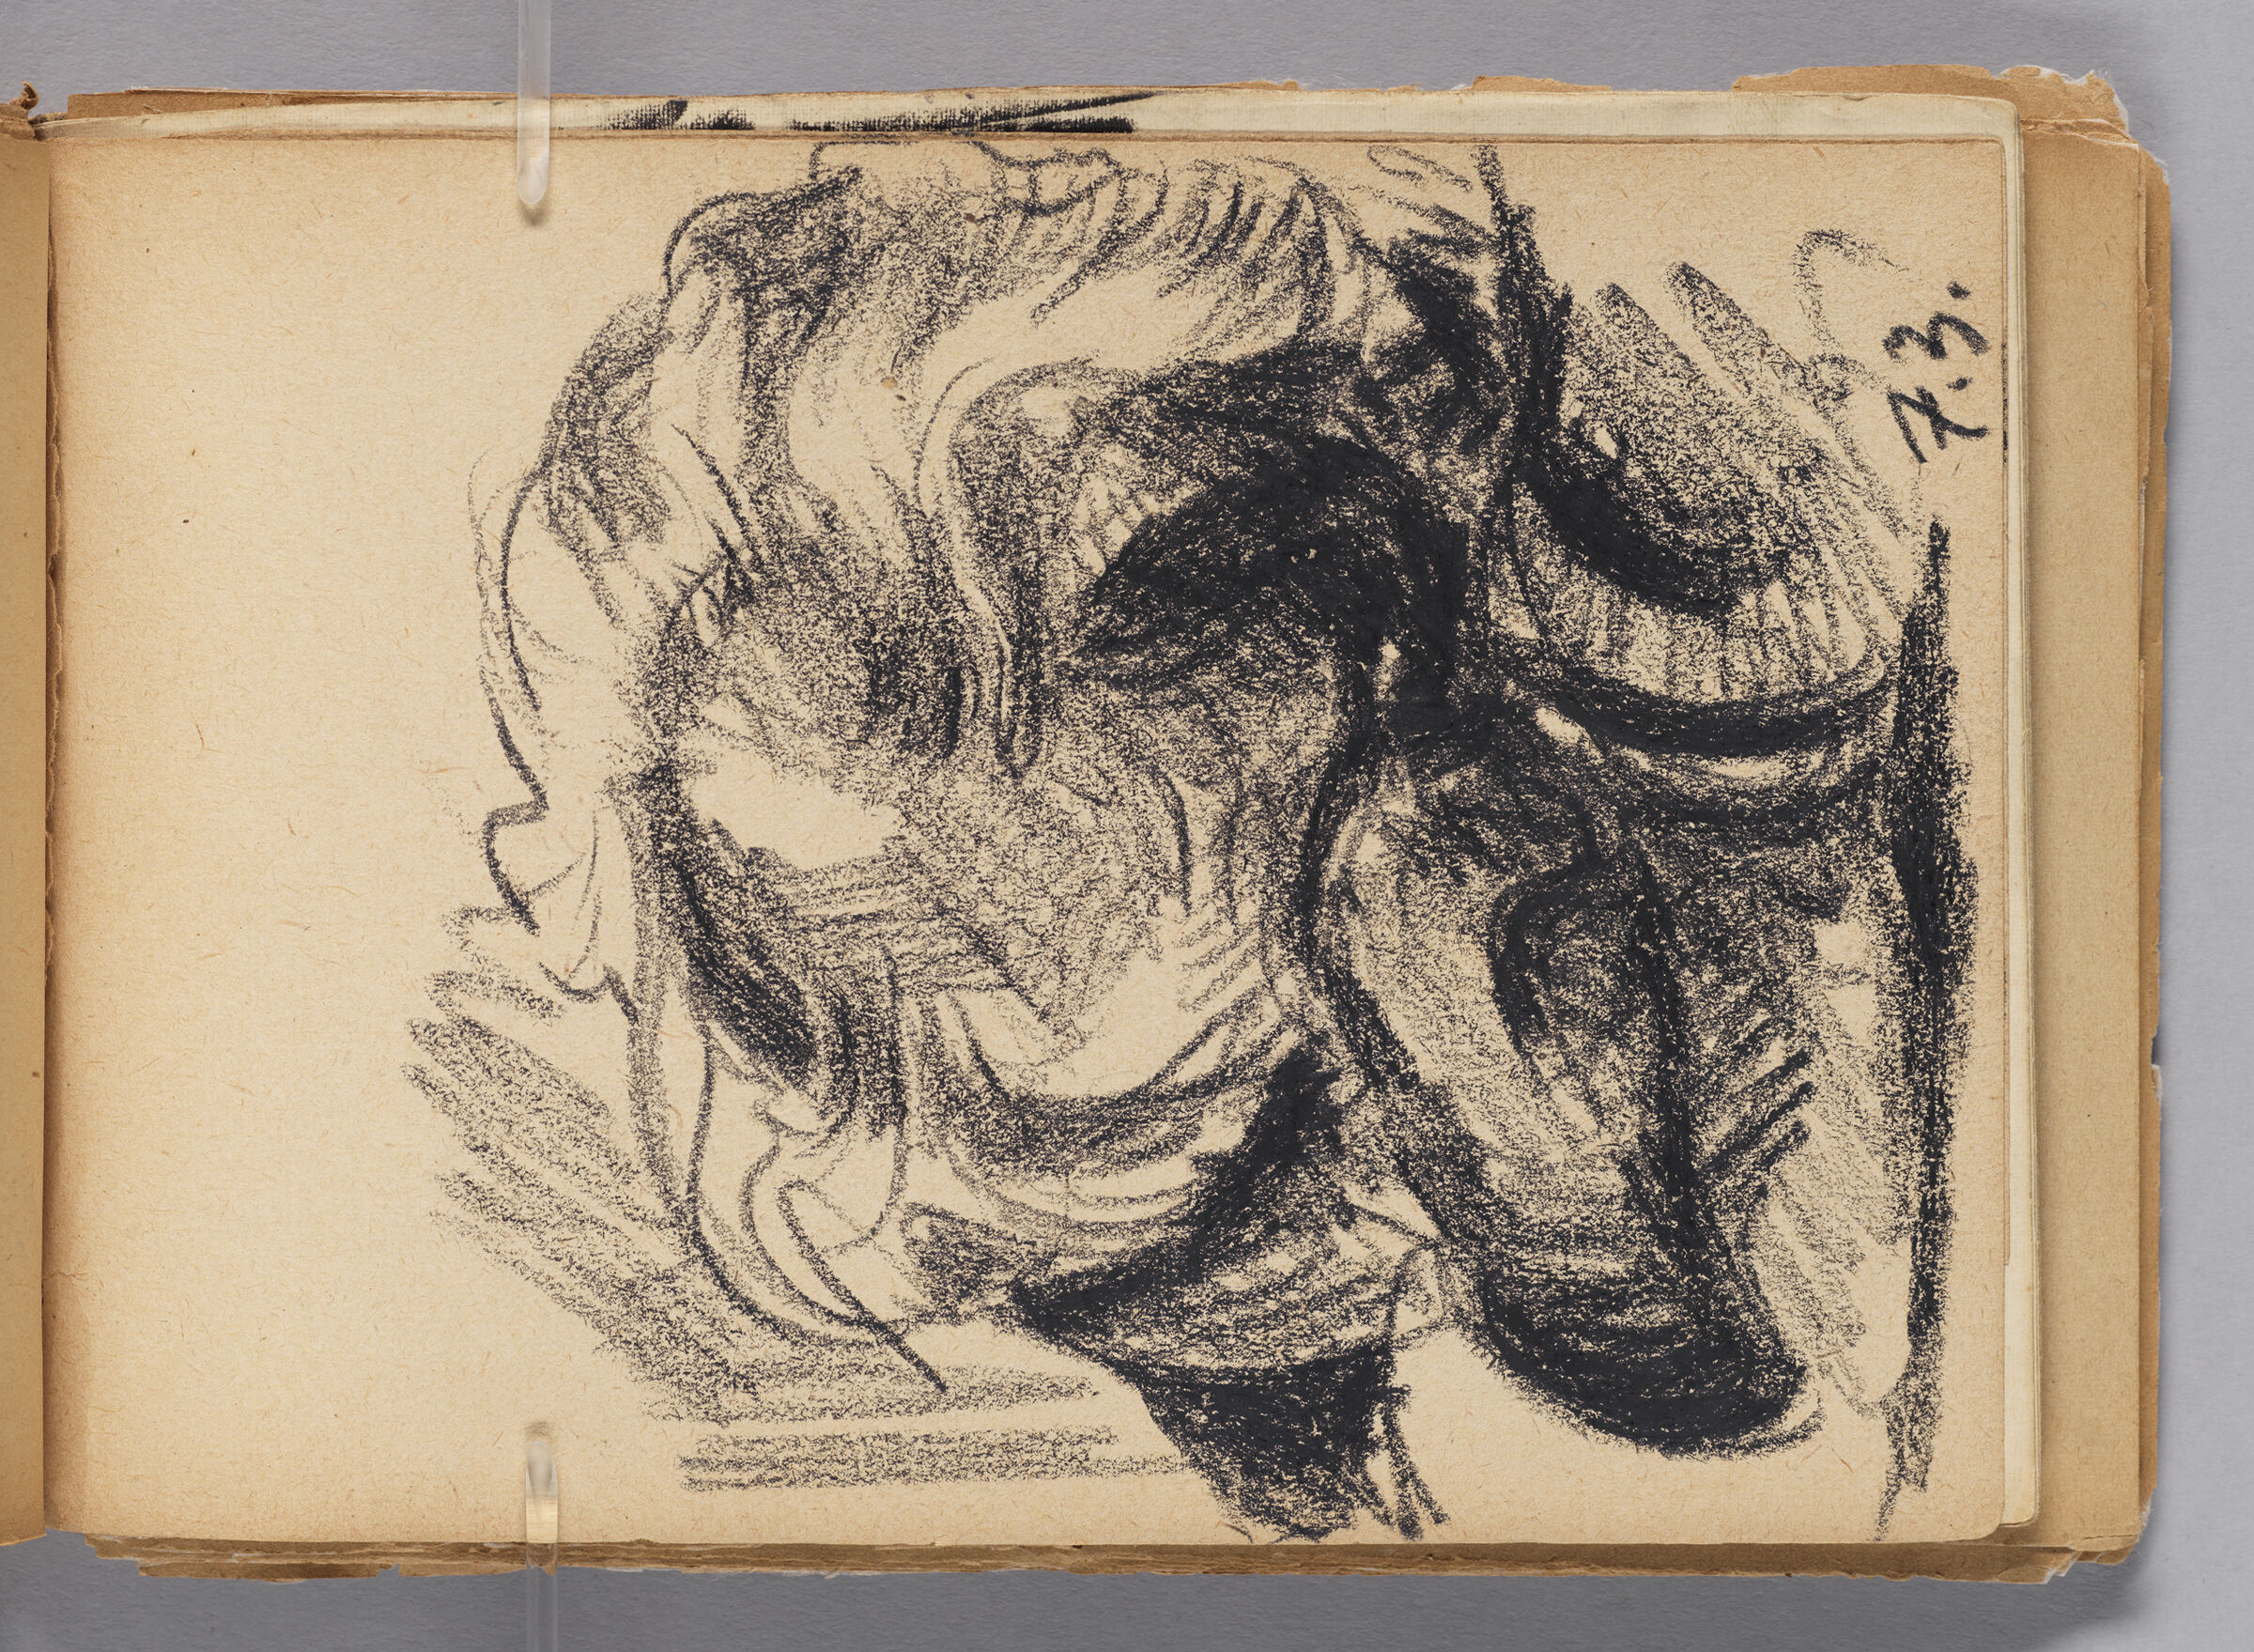 Untitled (Charcoal Transfer, Left Page); Untitled (Sleeping Figure With Head Resting On Hands, Right Page)